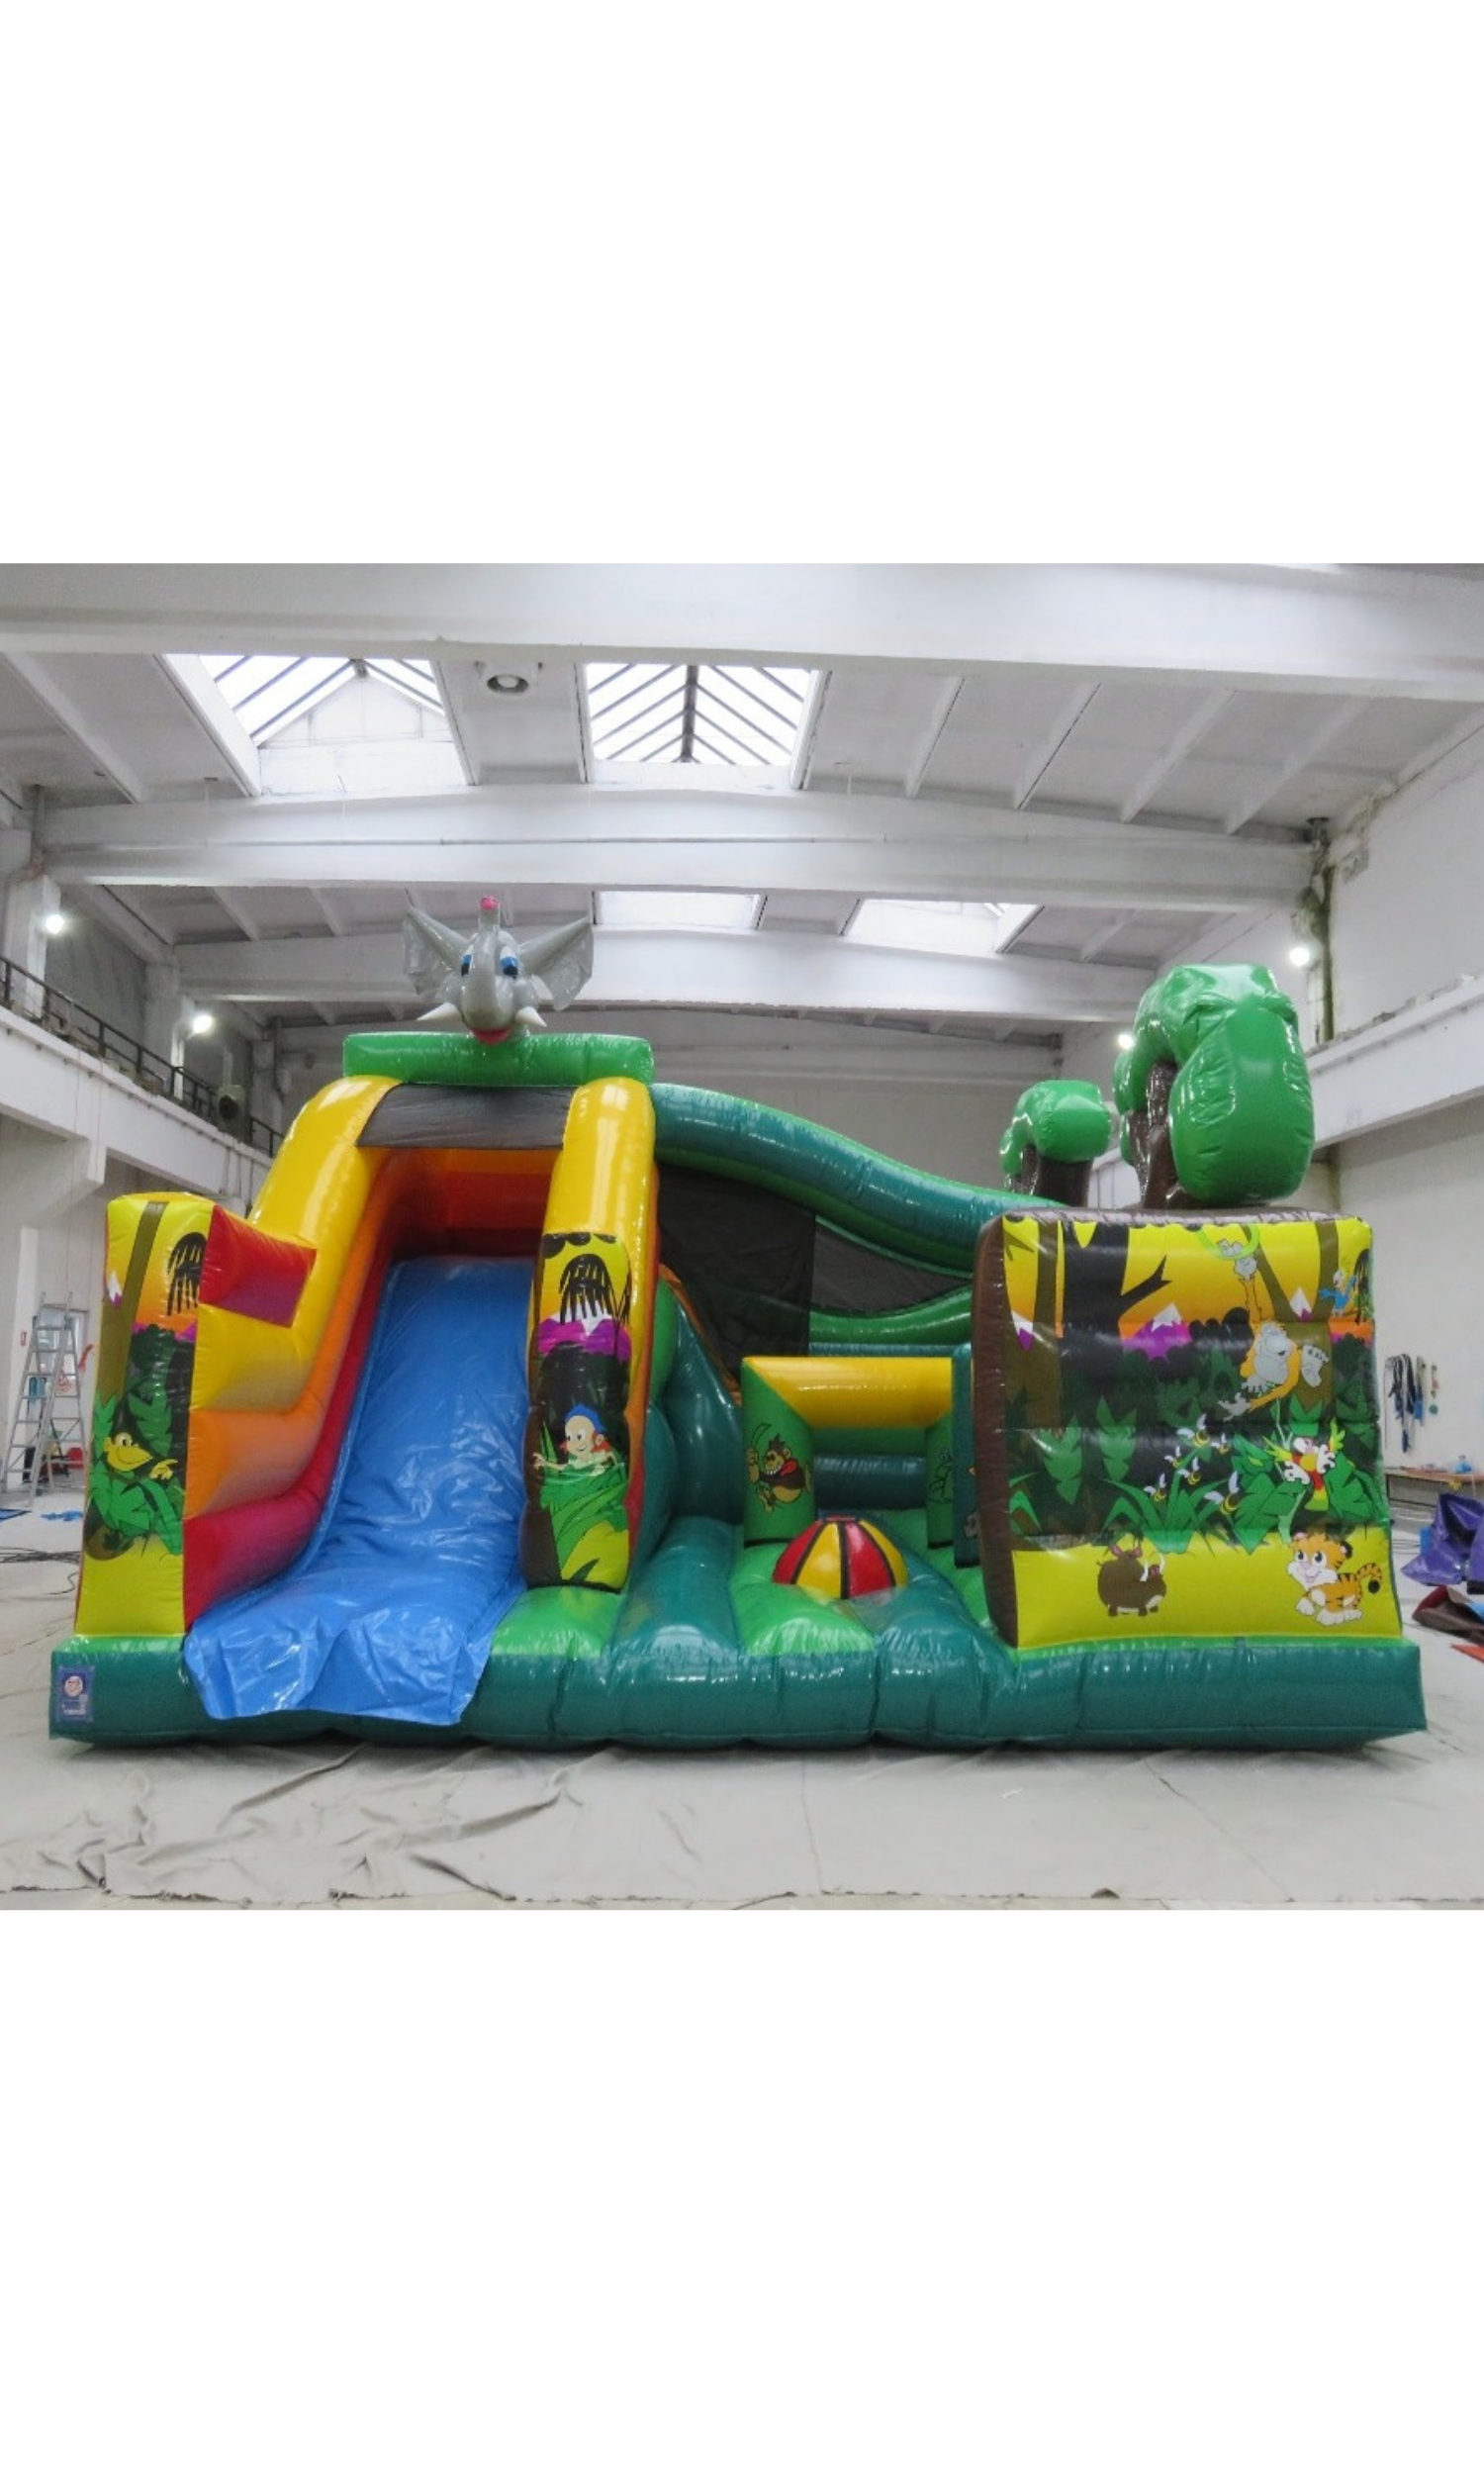 Jungle Multiplay and Slide